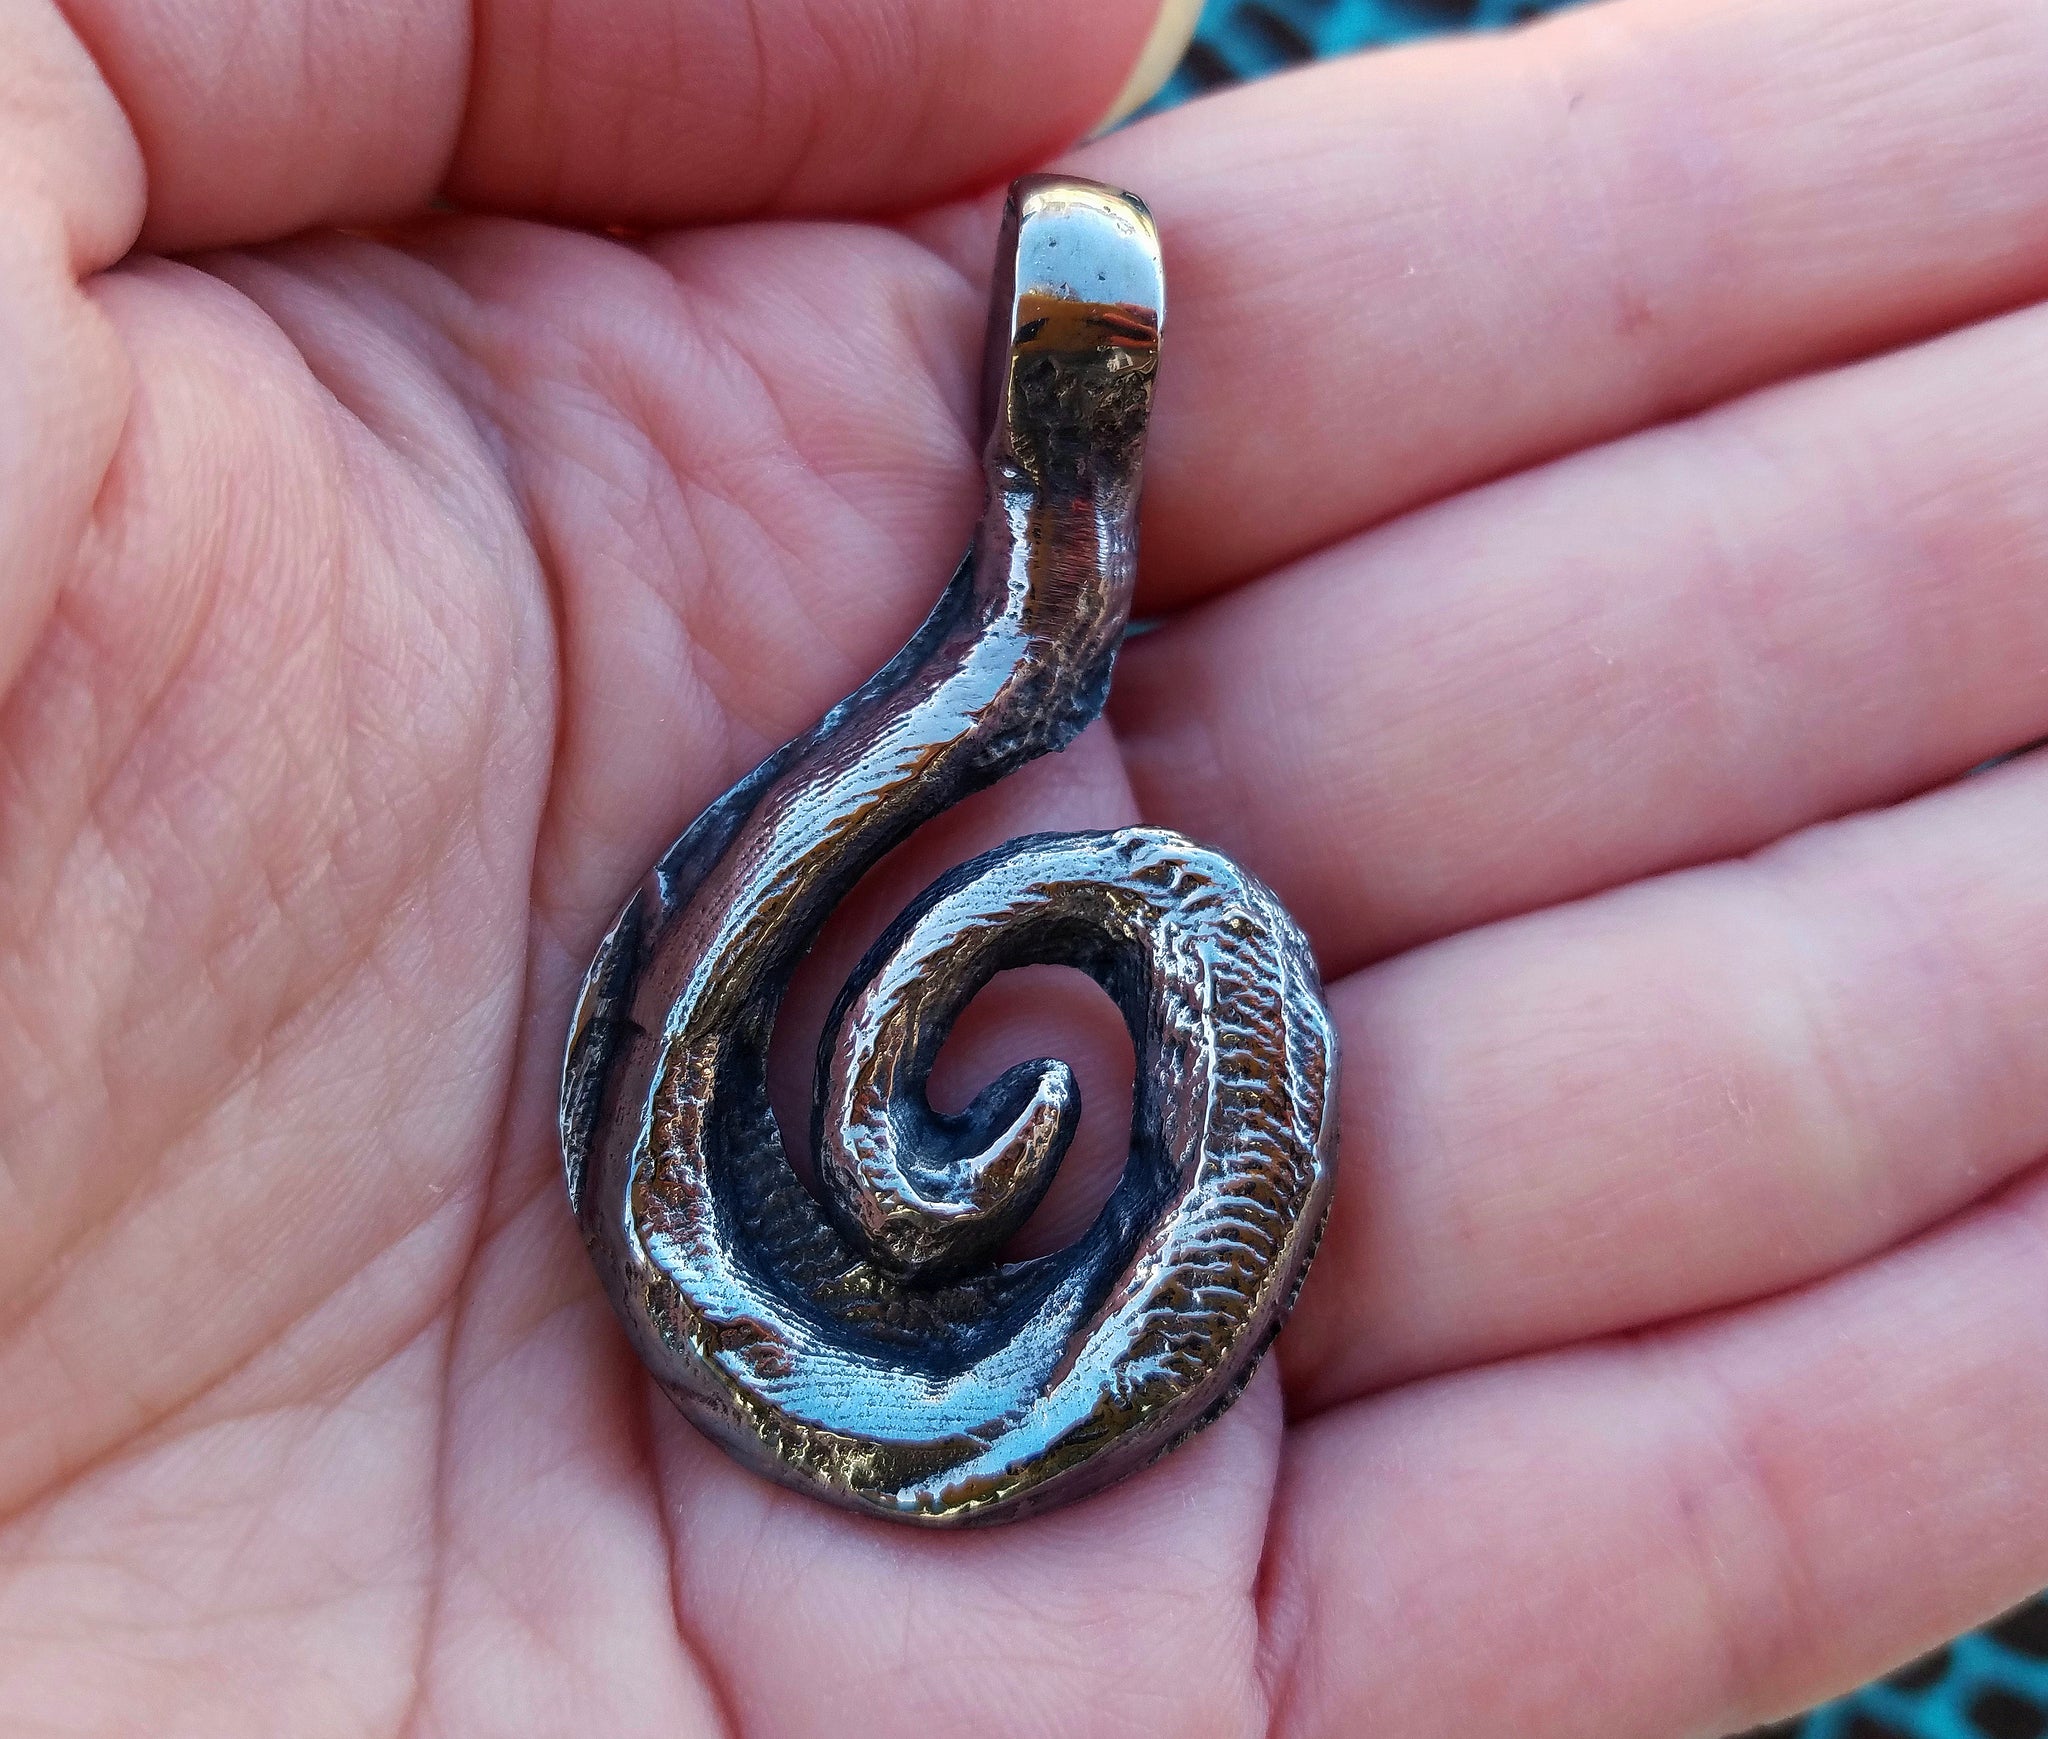 'Crashing Wave' Hand-carved Hand-poured Cuttlefish Pendant #1 by Phantom